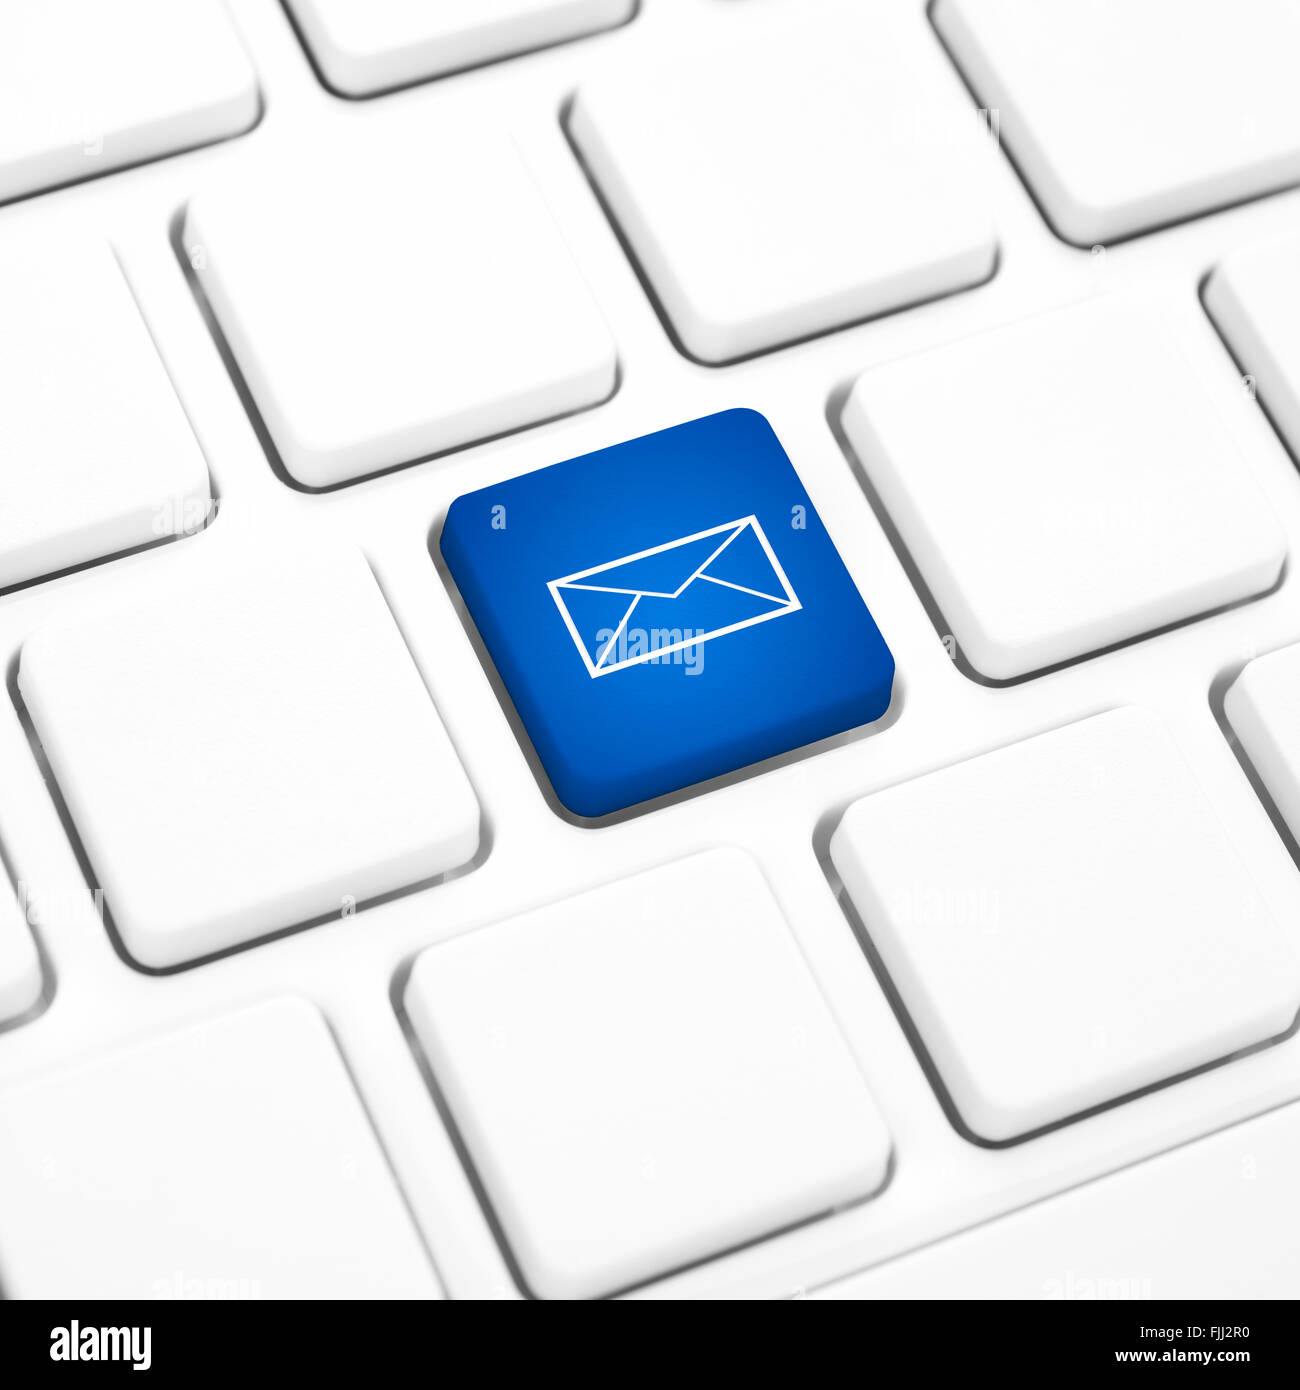 Web Mail network business concept, blue button or key on white keyboard. Stock Photo